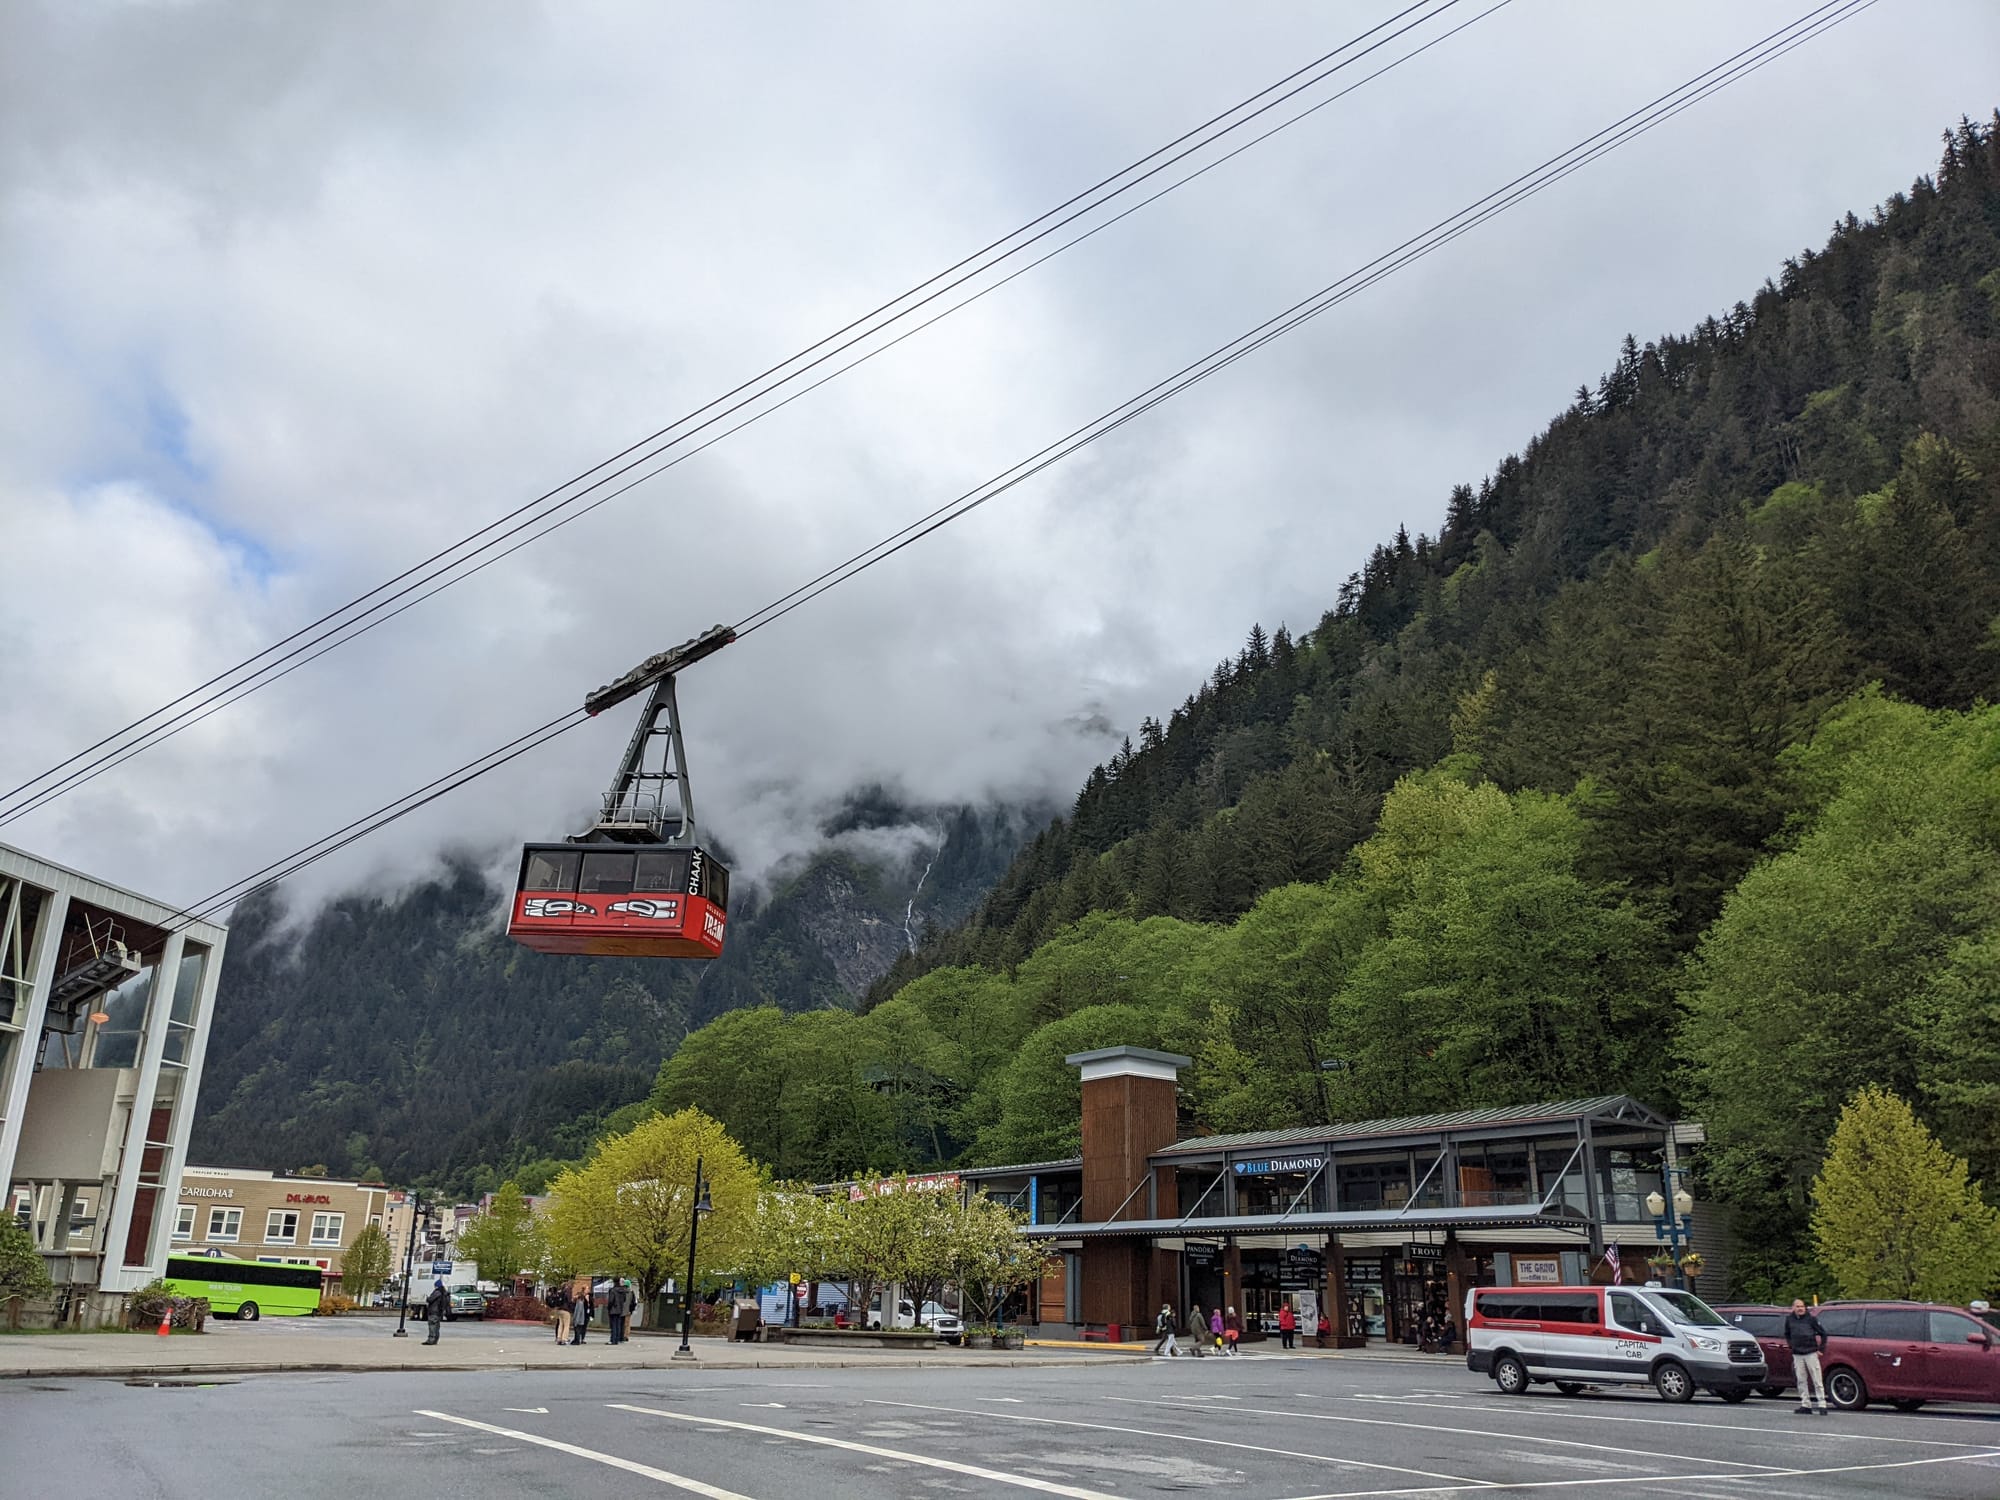 City Guides: Things to do While Boating in Juneau, Alaska